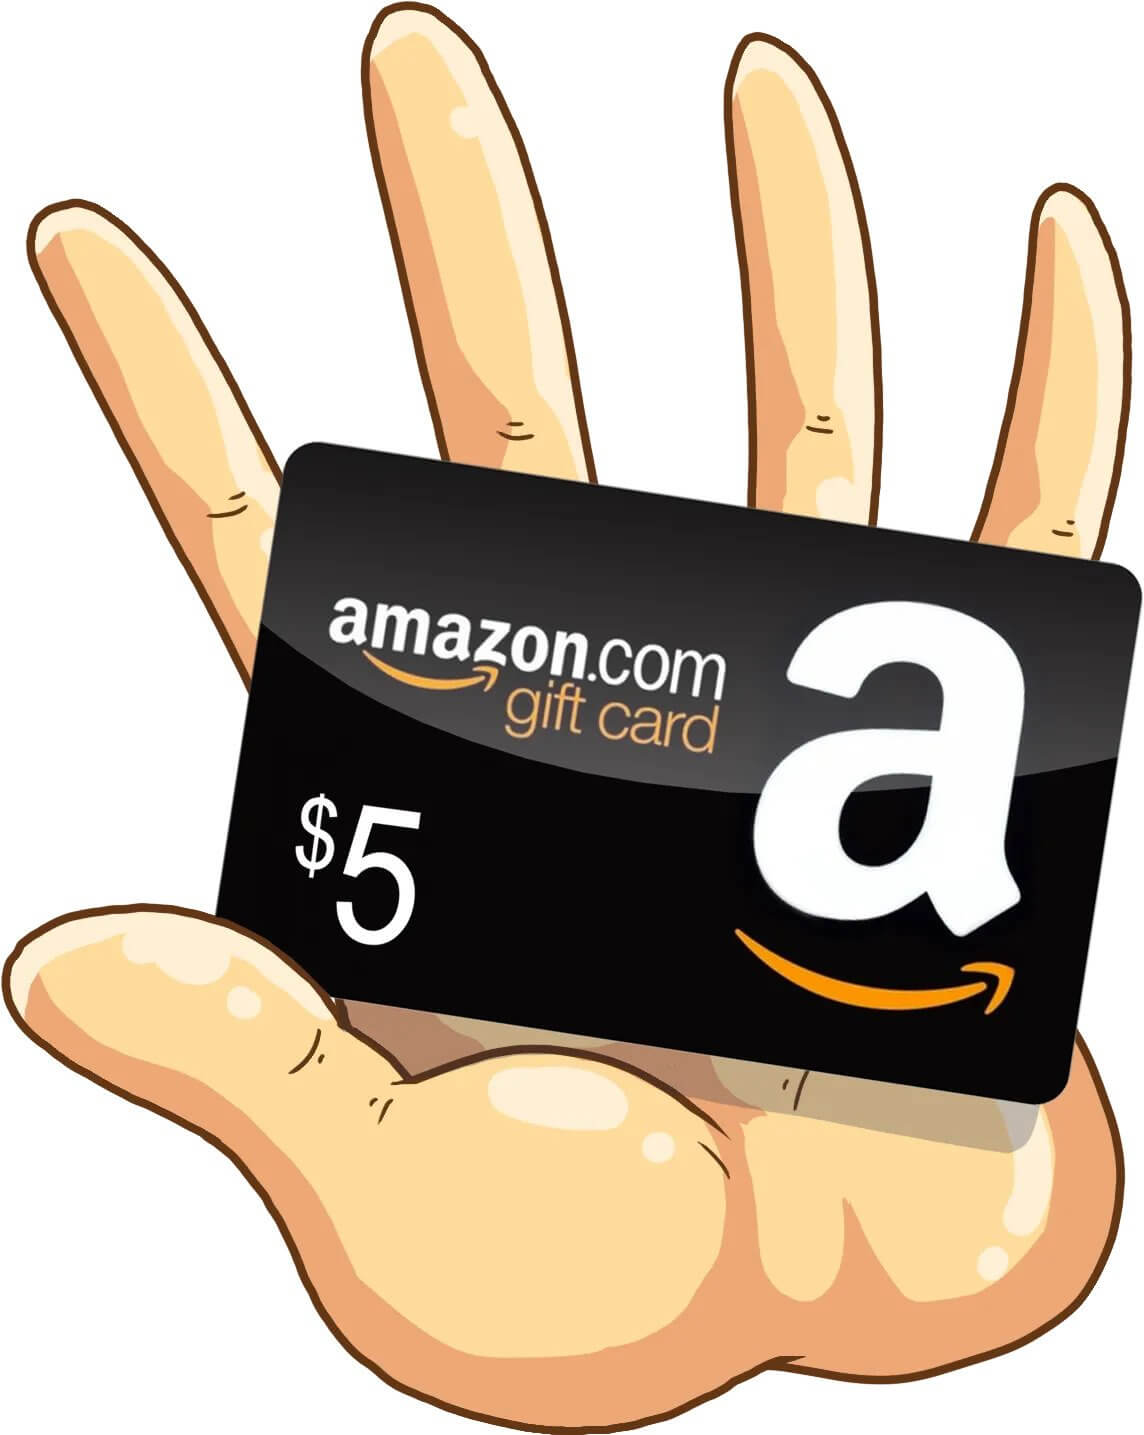 amazon gift card in hand